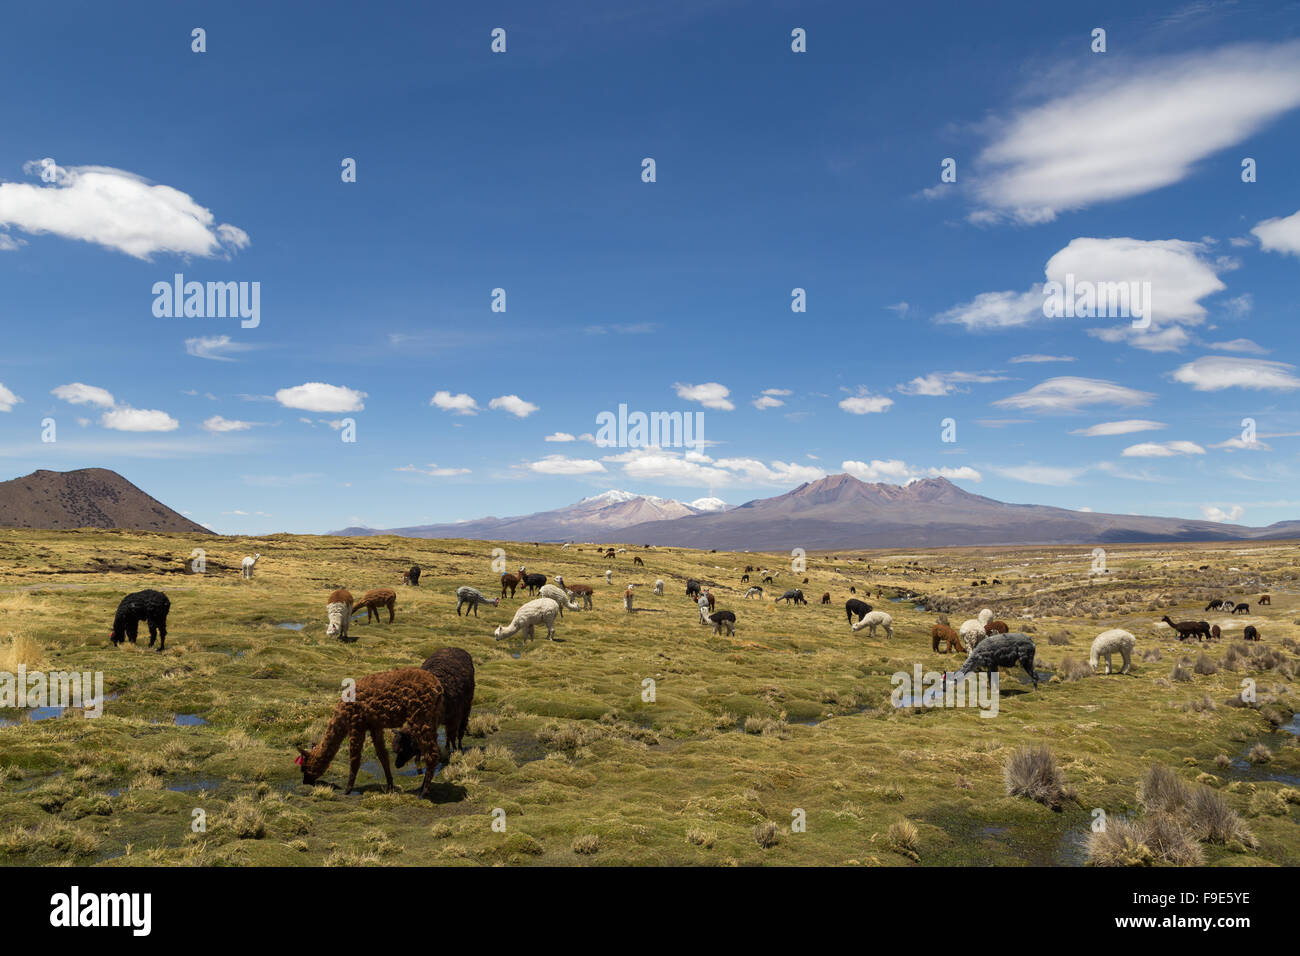 Photograph of a group of lamas and alpacas in Sajama National Park, Bolivia. Stock Photo